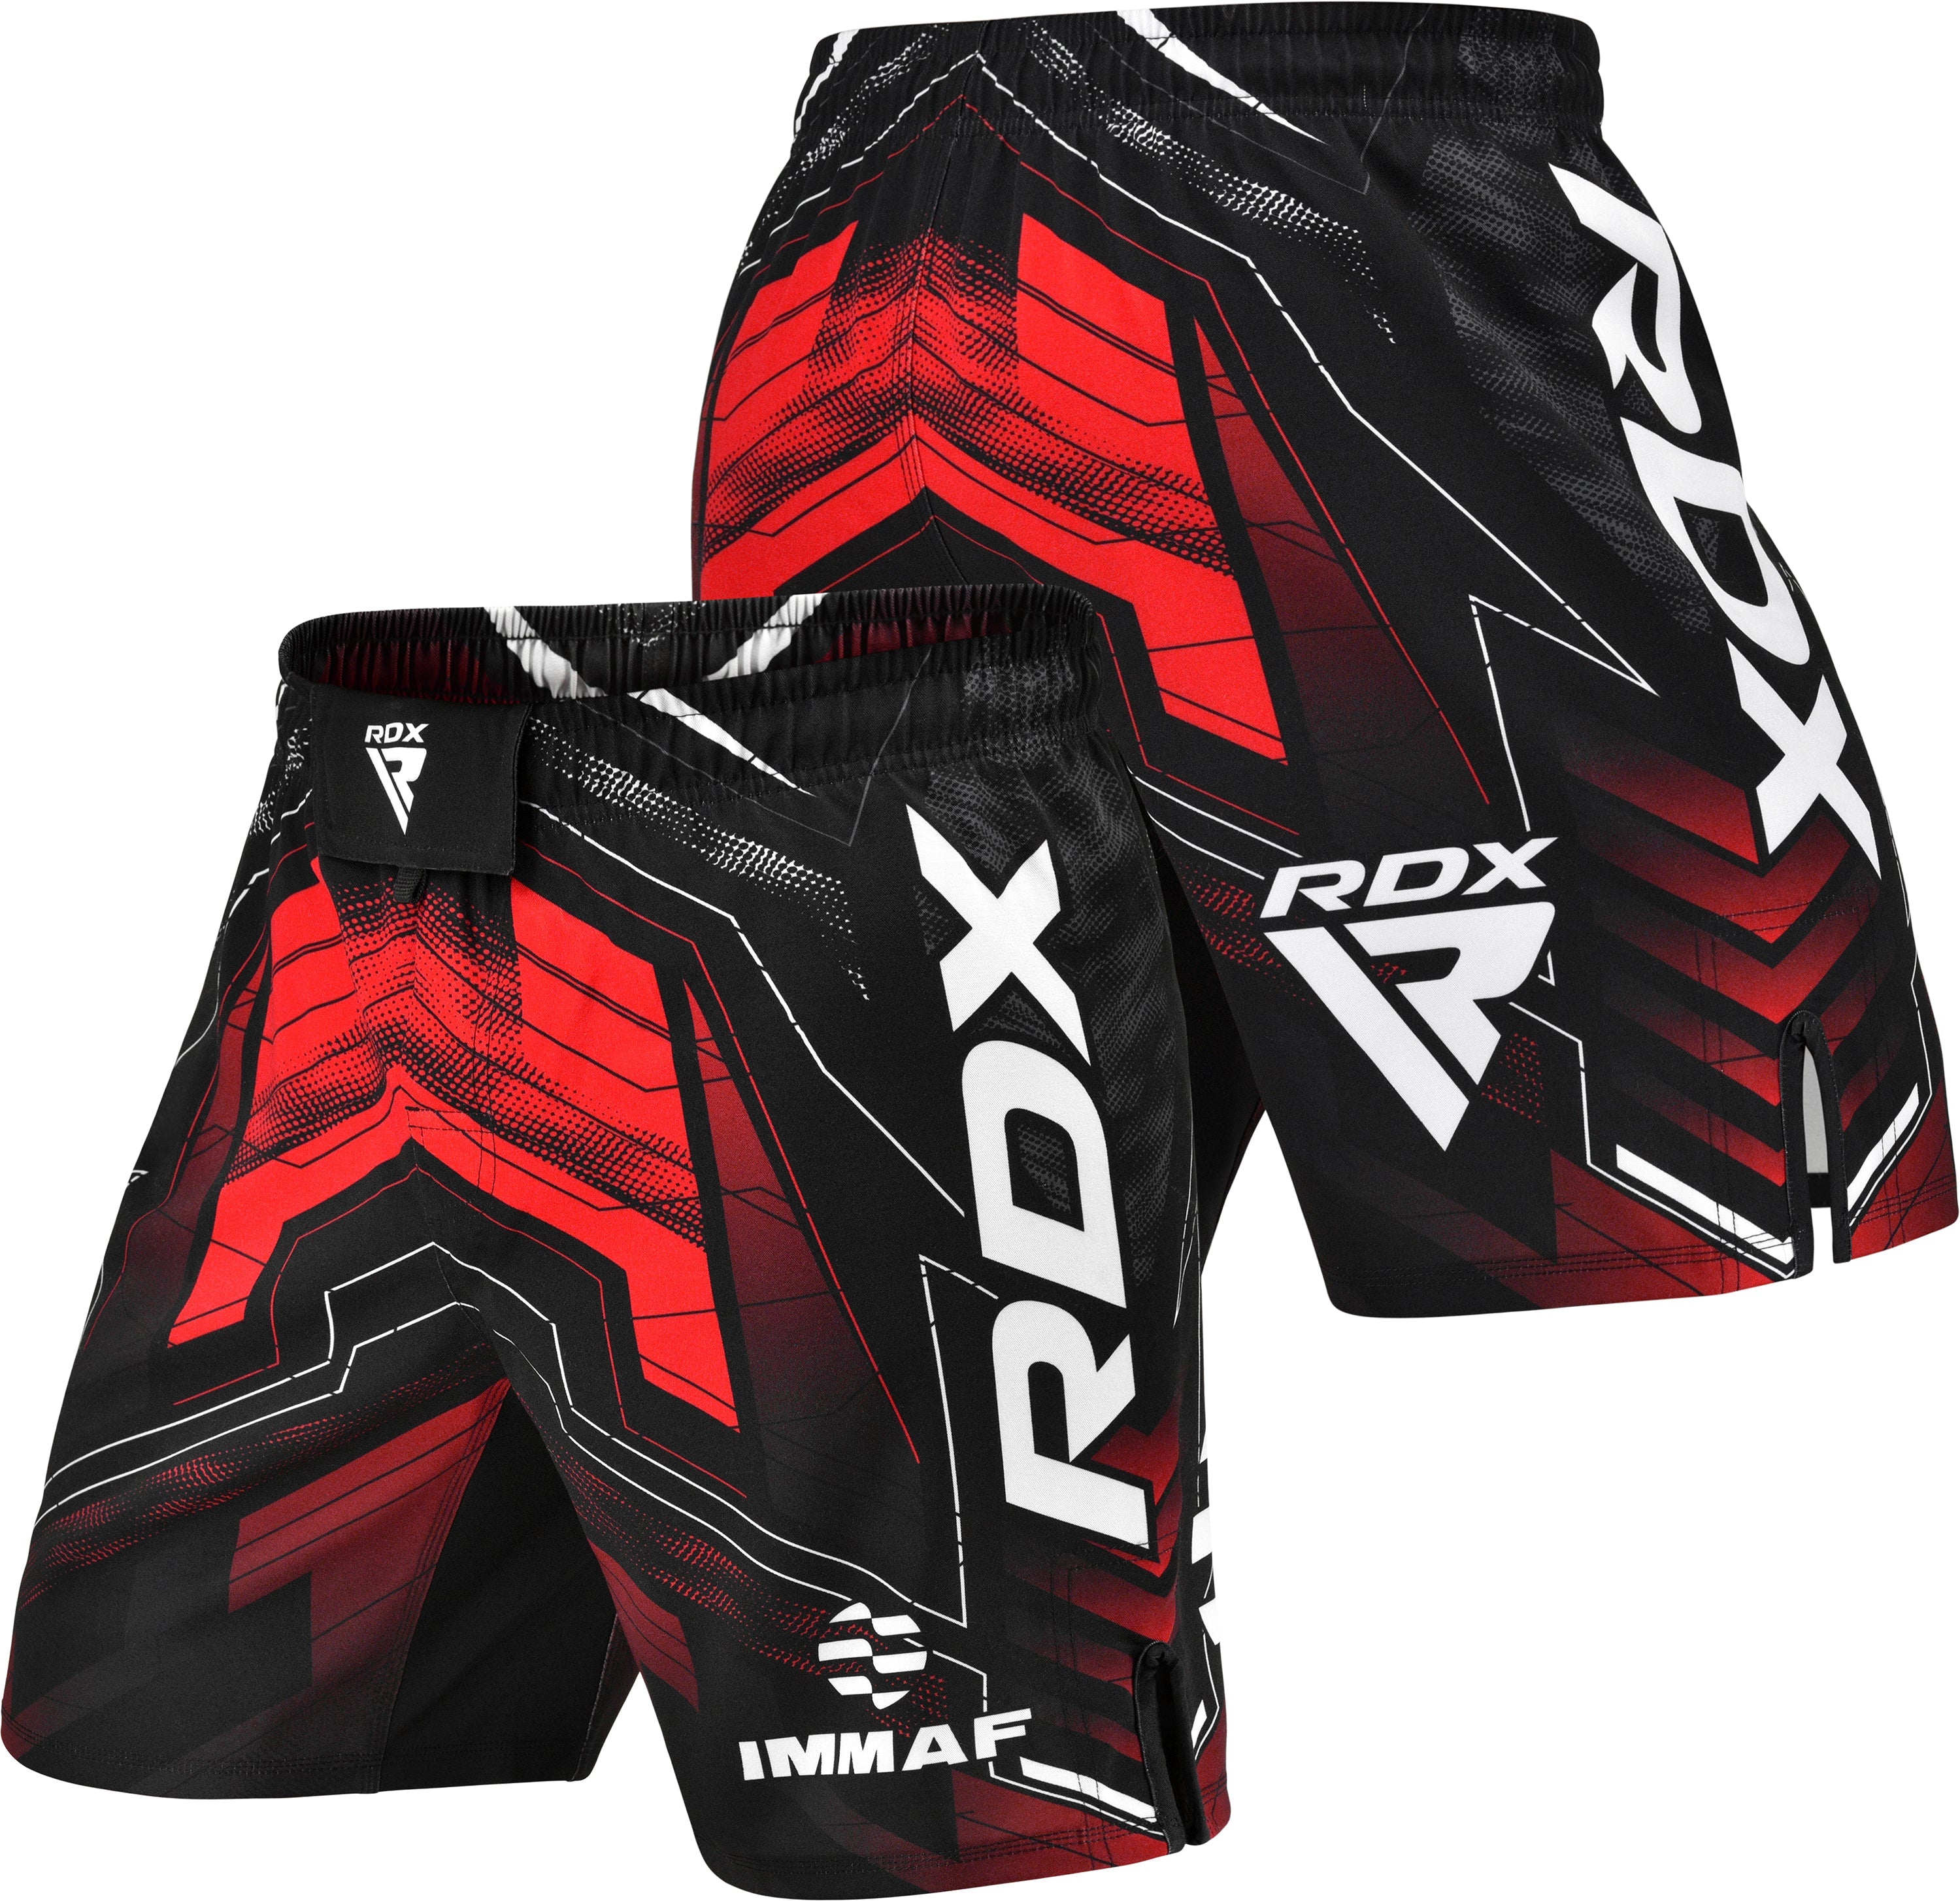 How to make your own MMA Mats - RDX Sports Blog